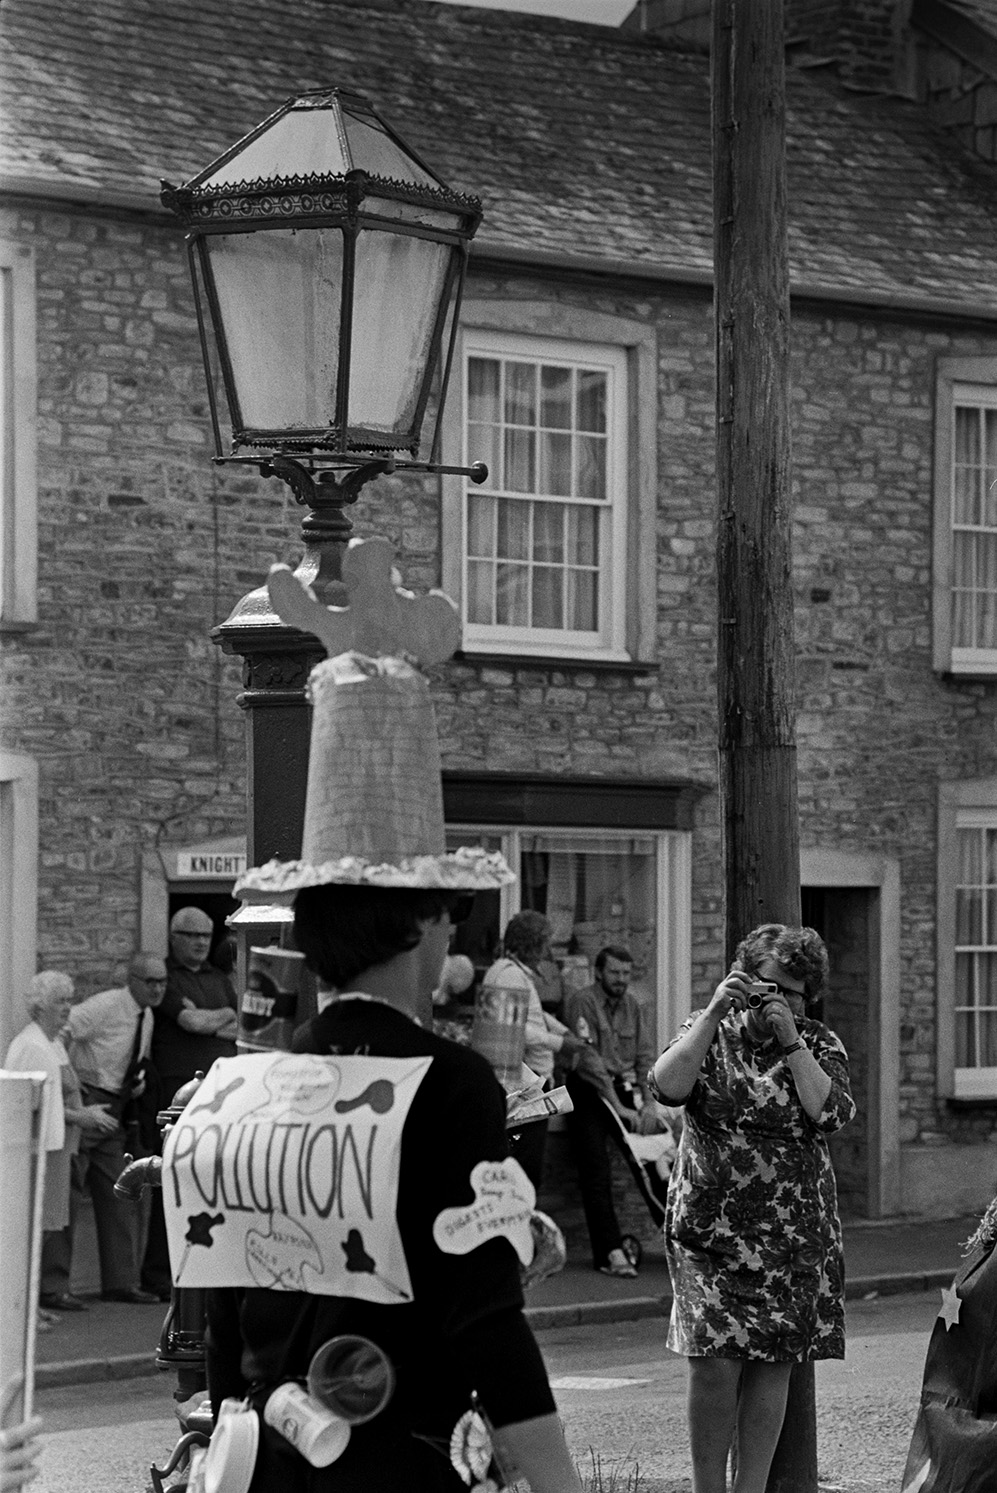 A woman taking a photographs of a person in fancy dress by a lamp in a street at Chulmleigh Fair. They are wearing a costume titled 'Pollution' with various bits of rubbish stuck to their clothes.